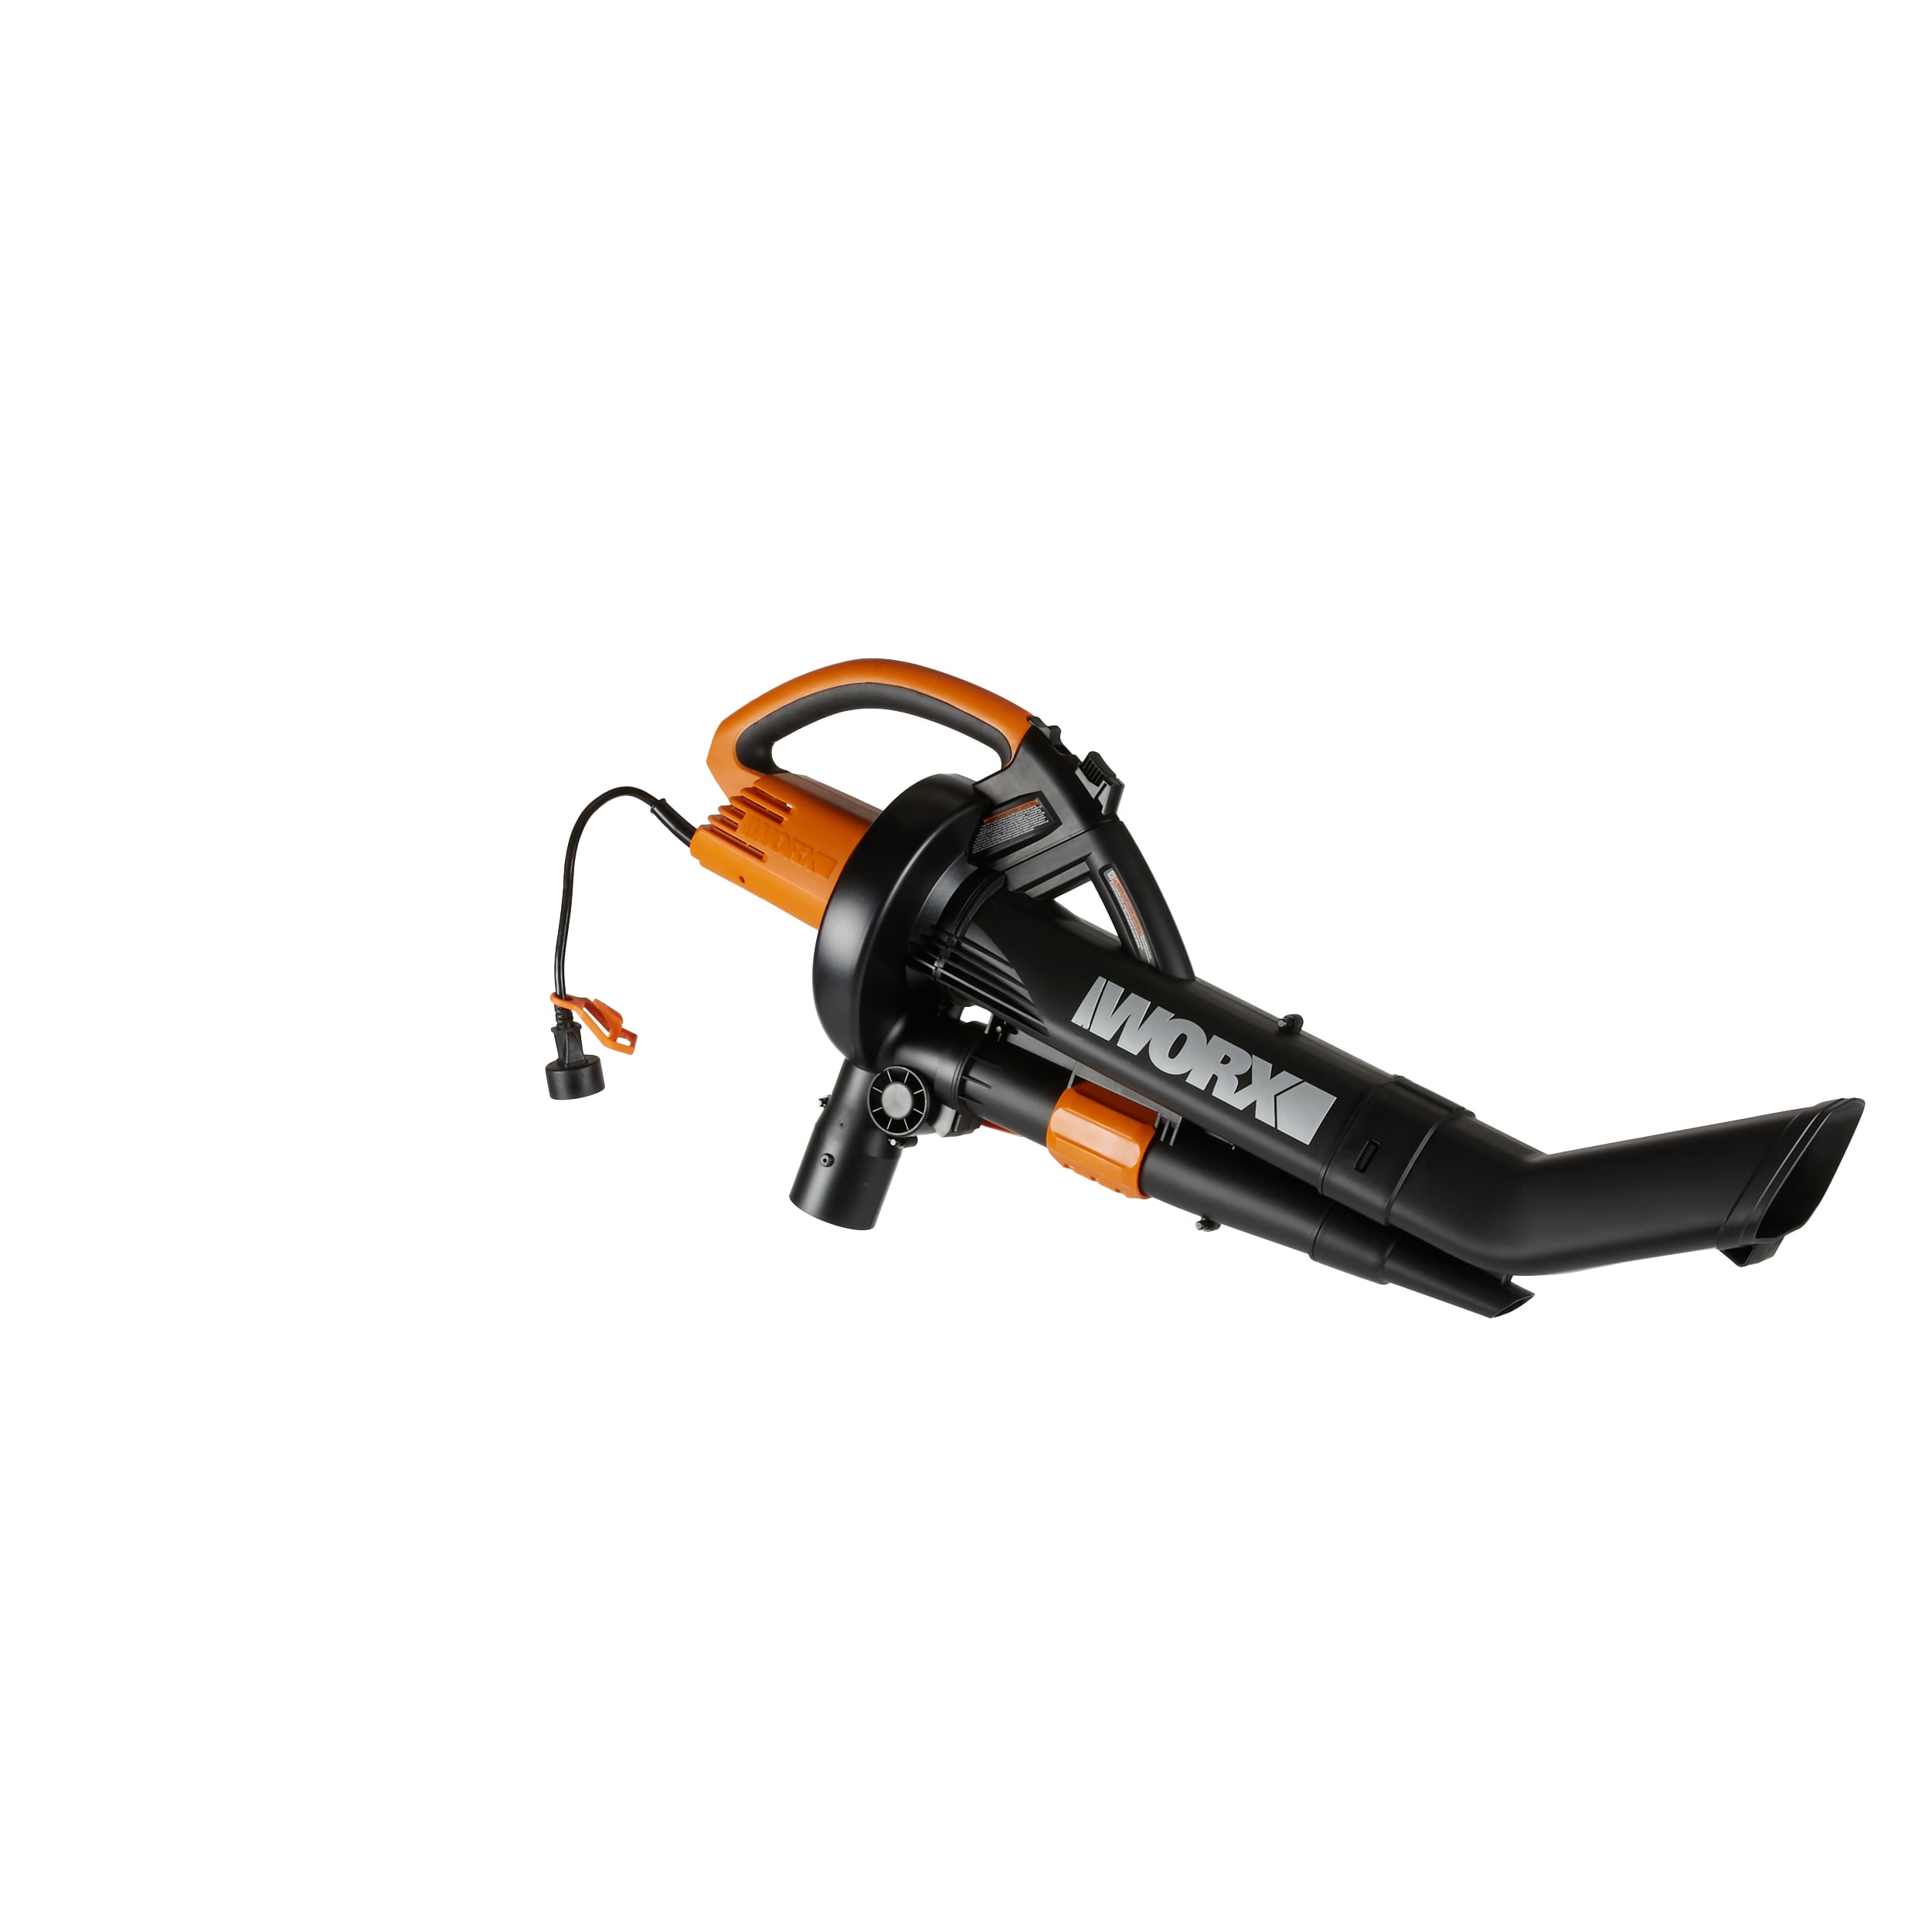 TACKLIFE 3 in 1 Leaf Blower 45L Collection Bag Max.175 MPH Air Speed and Max.388 CFM Suction Volume with 15:1 Mulching Ratio KABV35A 12 Amp Blower/Vacuum/Mulcher 